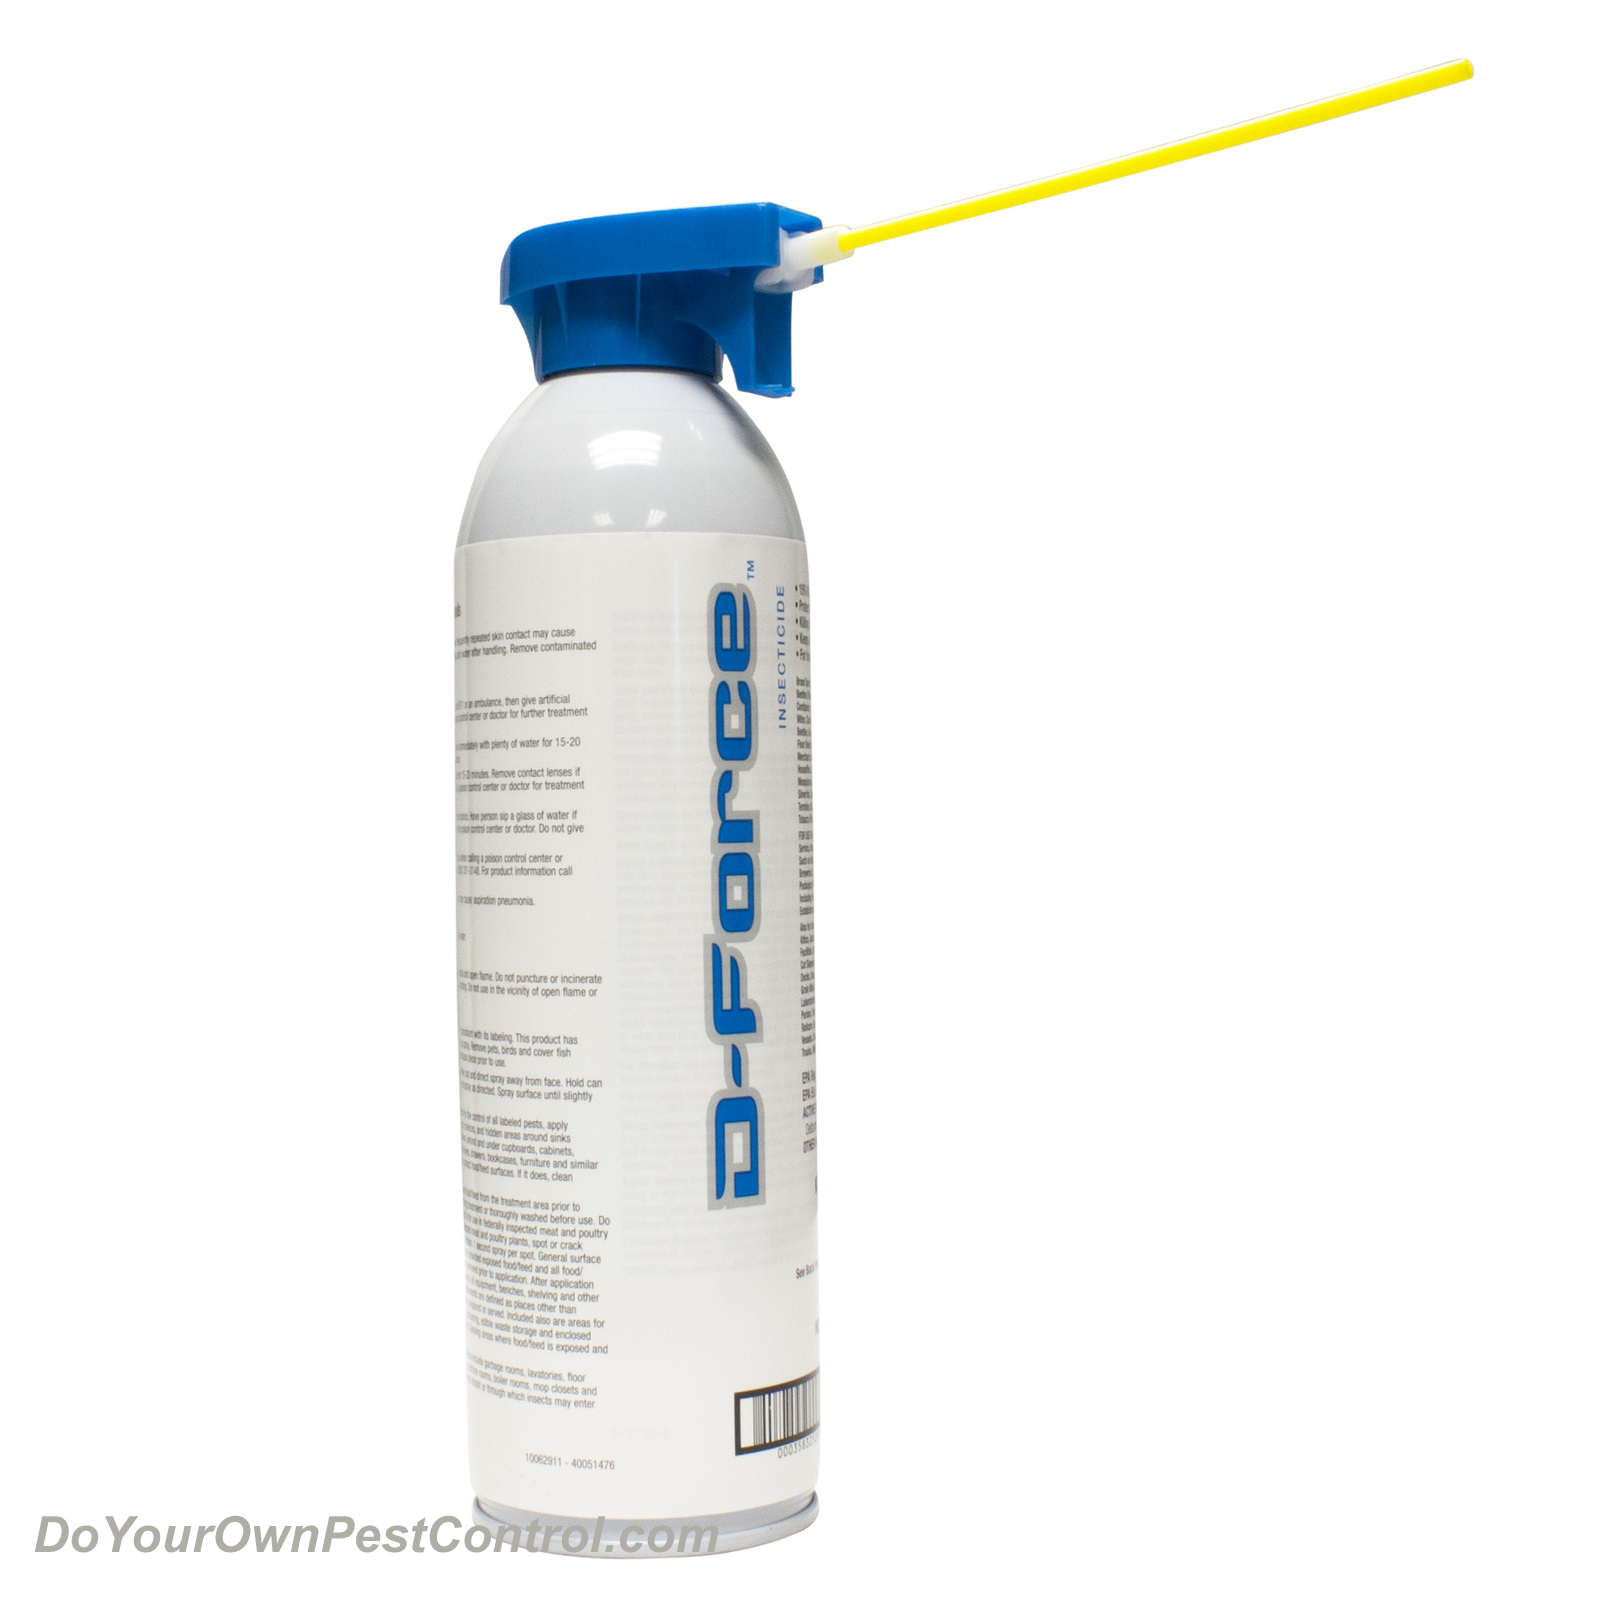 D-Force Insecticide Residual Aerosol